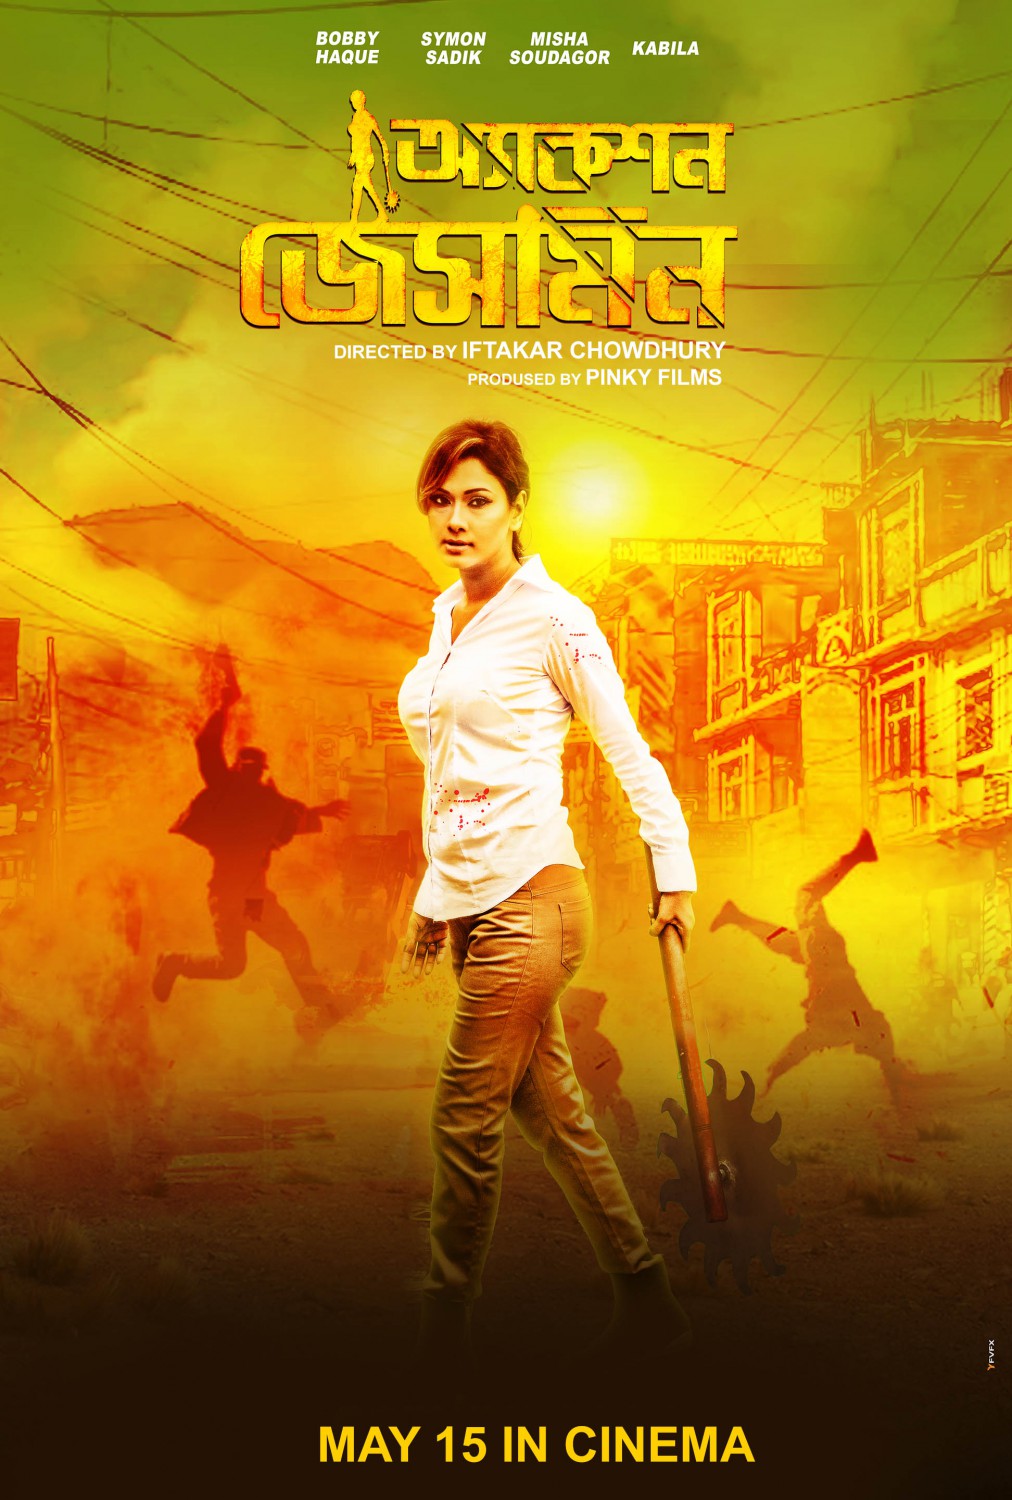 Extra Large Movie Poster Image for Action Jasmine (#2 of 2)